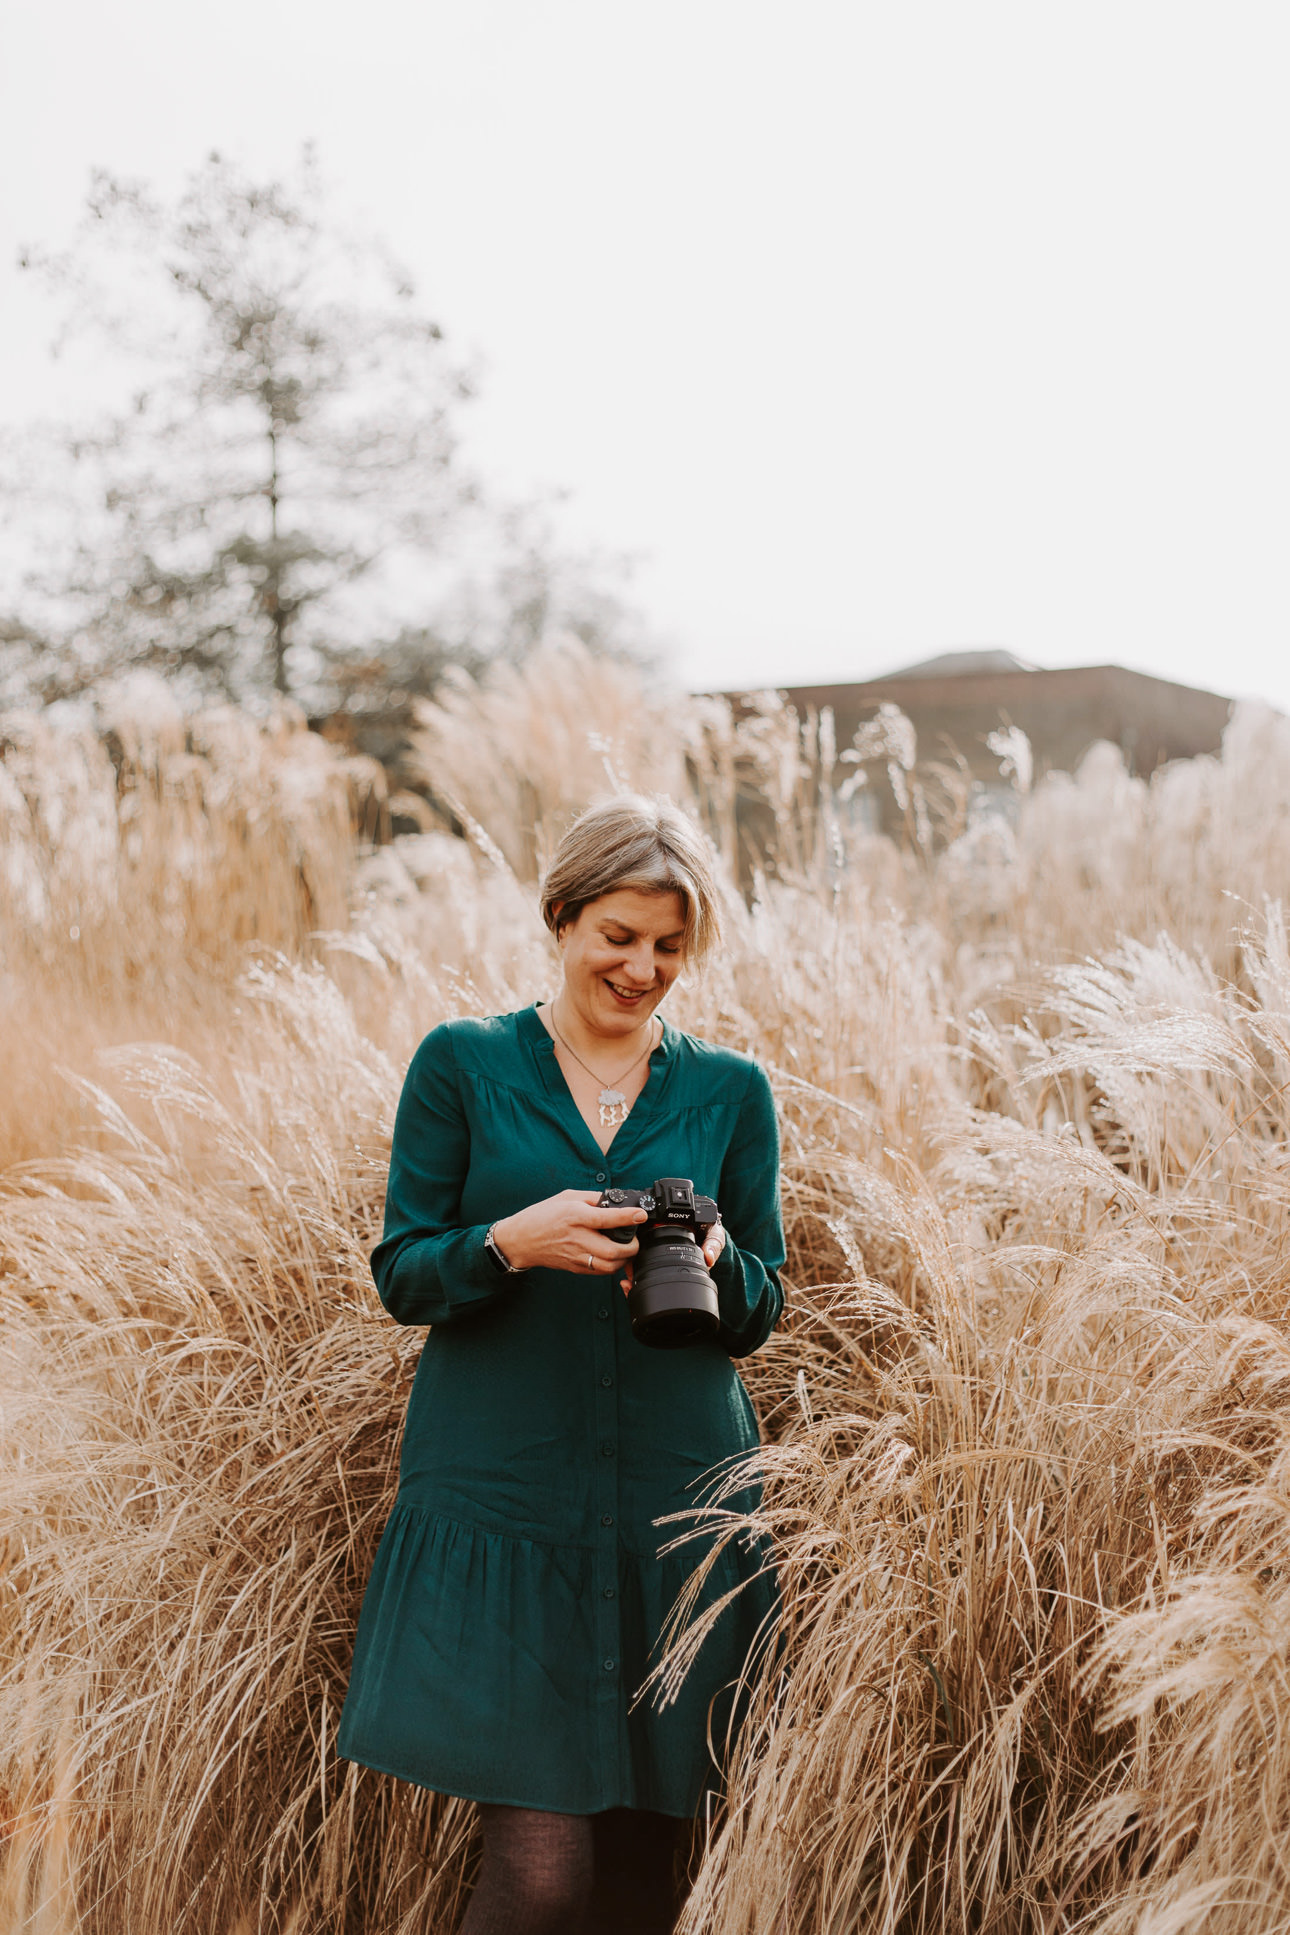 Photographer Helen Lisk wearing a green dress in a grassy field and looking down at her camera